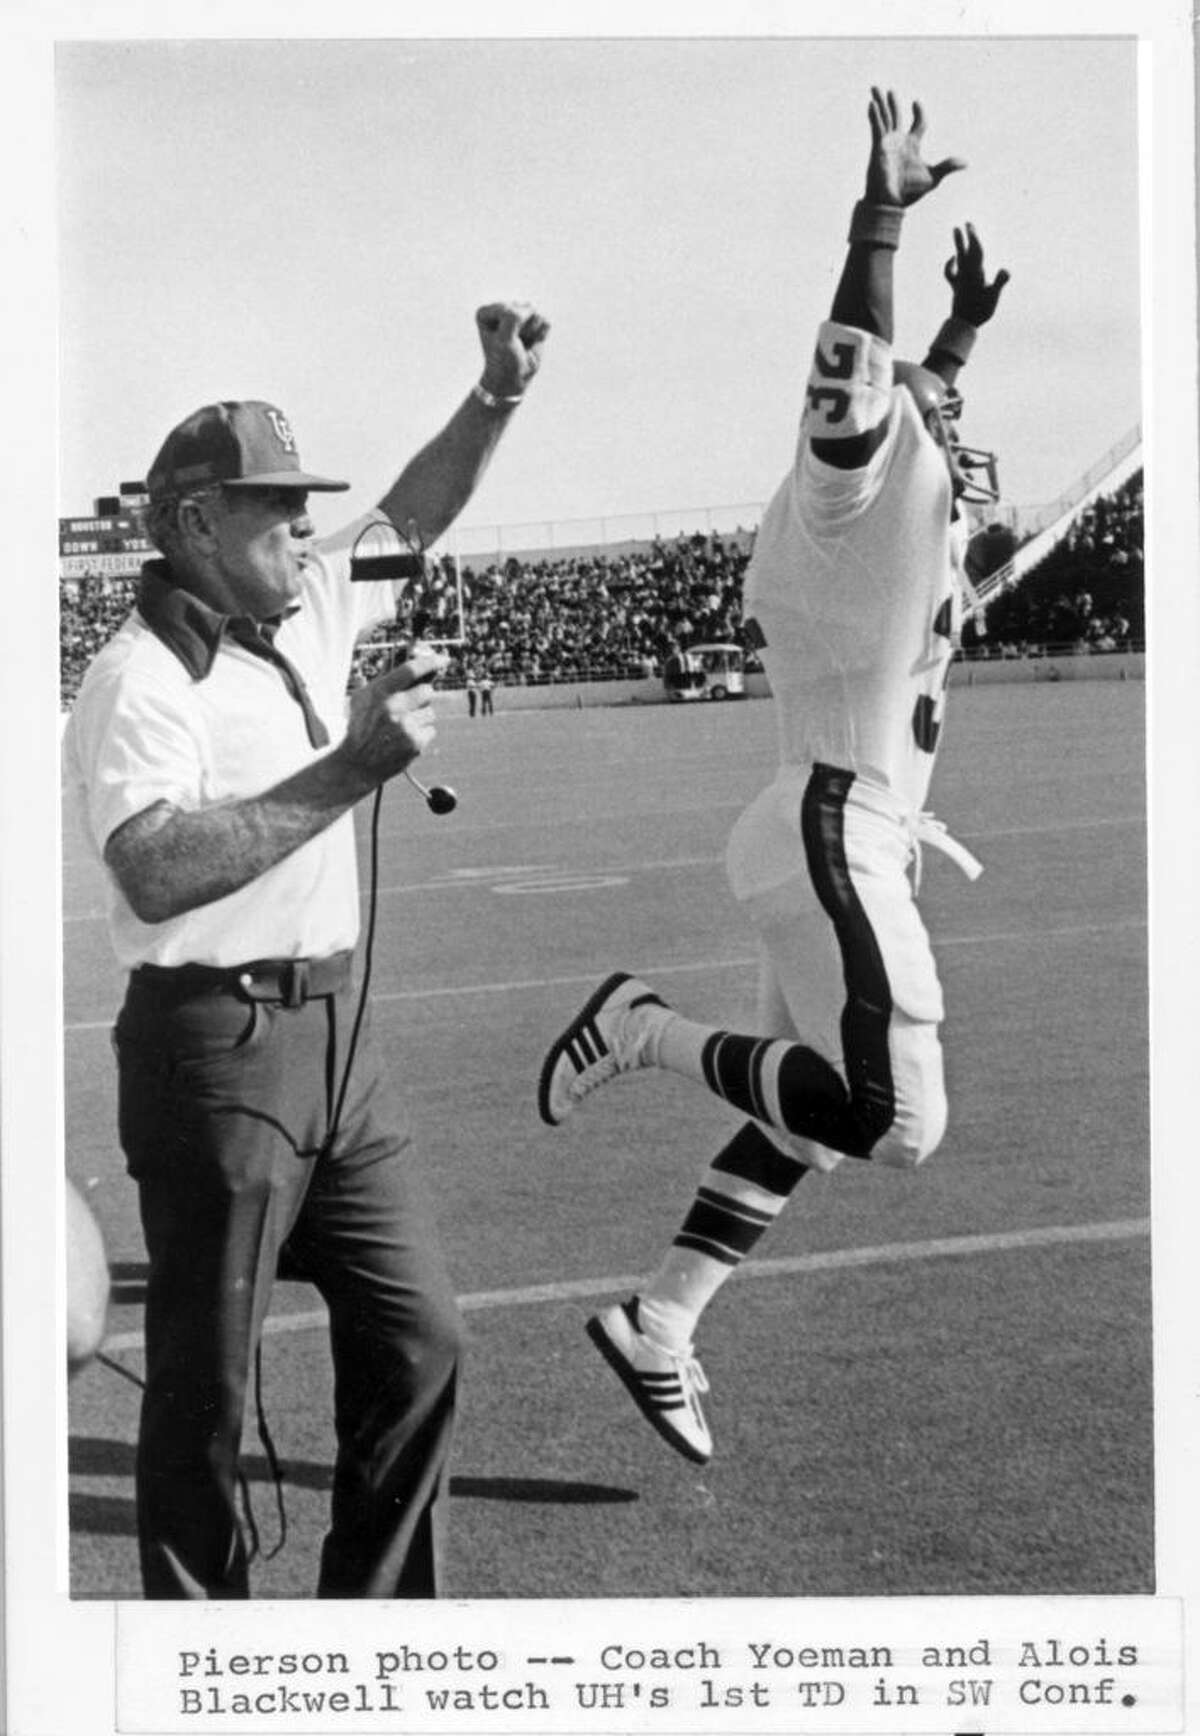 Bill Yeoman and Alois Blackwell celebrate UH's first touchdown in the Southwest Conference. The score was made with a 4-yard run by quarterback Danny Davis against the Baylor Bears in Waco in 1976.